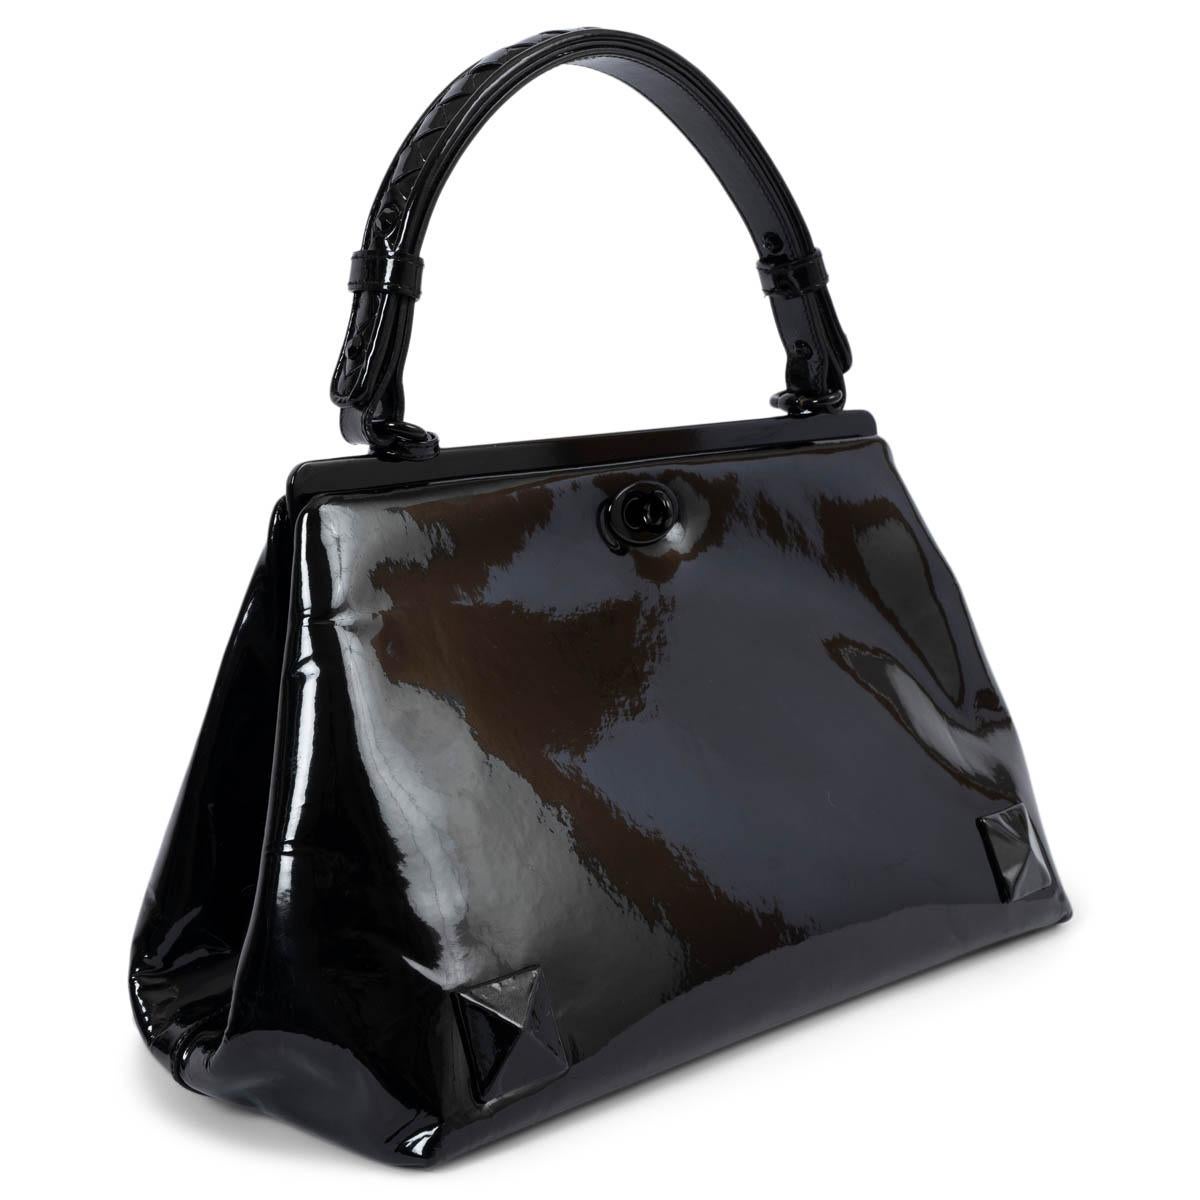 100% authentic Bottega Veneta top handle bag in black patent leather. Features a intrecciato woven handle, pyramid studs in the bottom corners and shiny black hardware. Opens with a turn-lock on each side into a cream interior with a zipper pocket